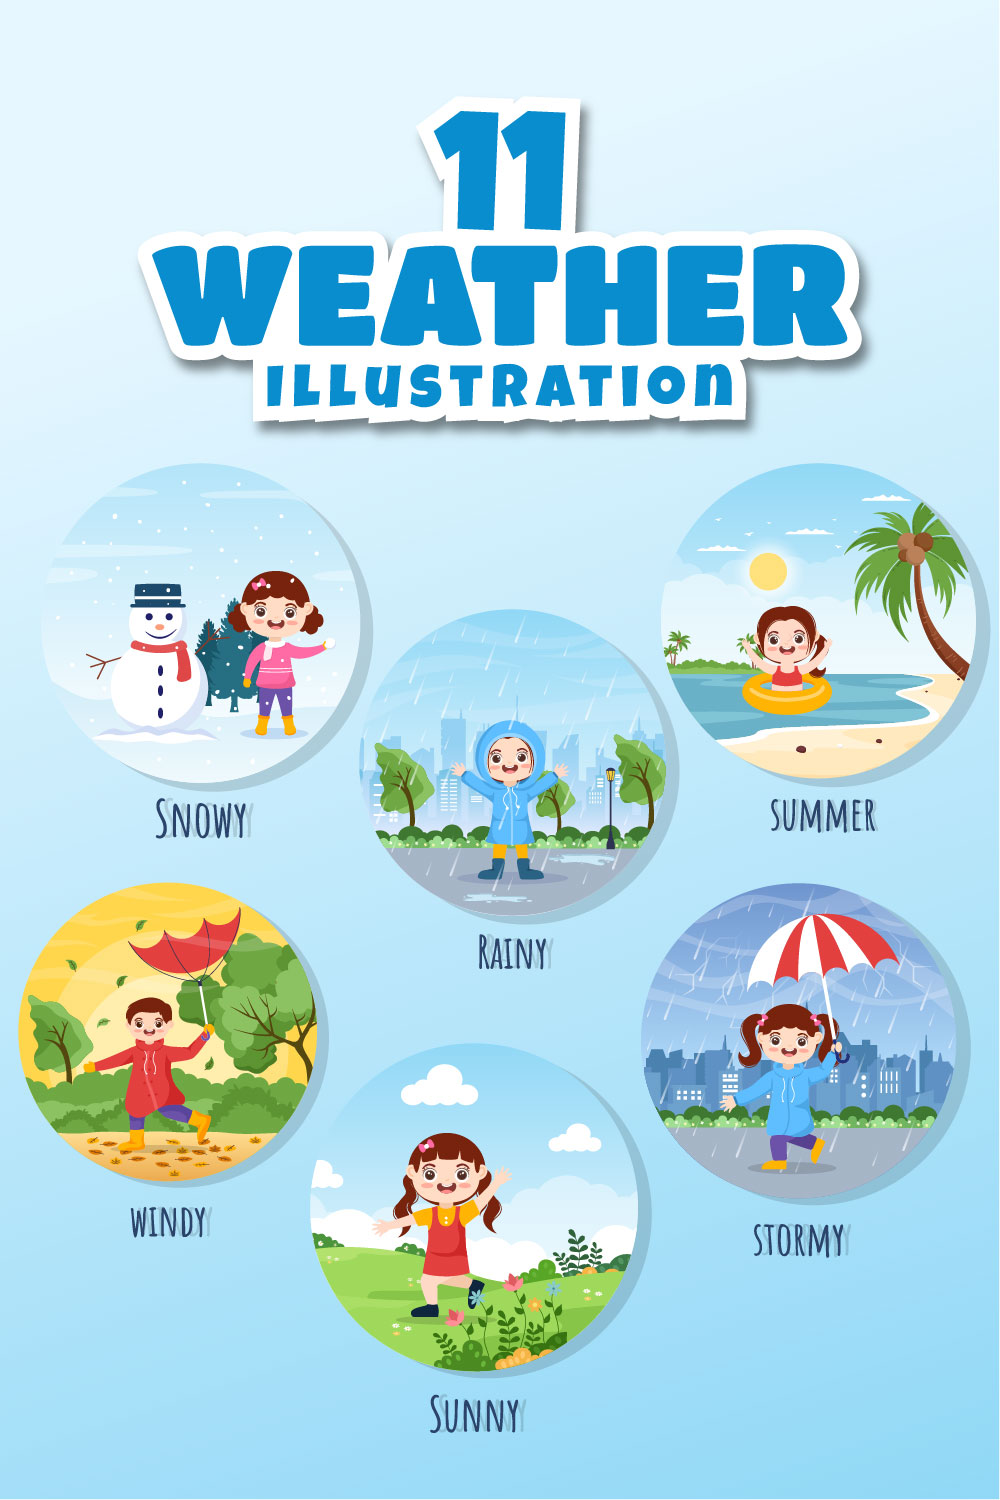 11 Types of Weather Conditions Illustration Pinterest collage image.